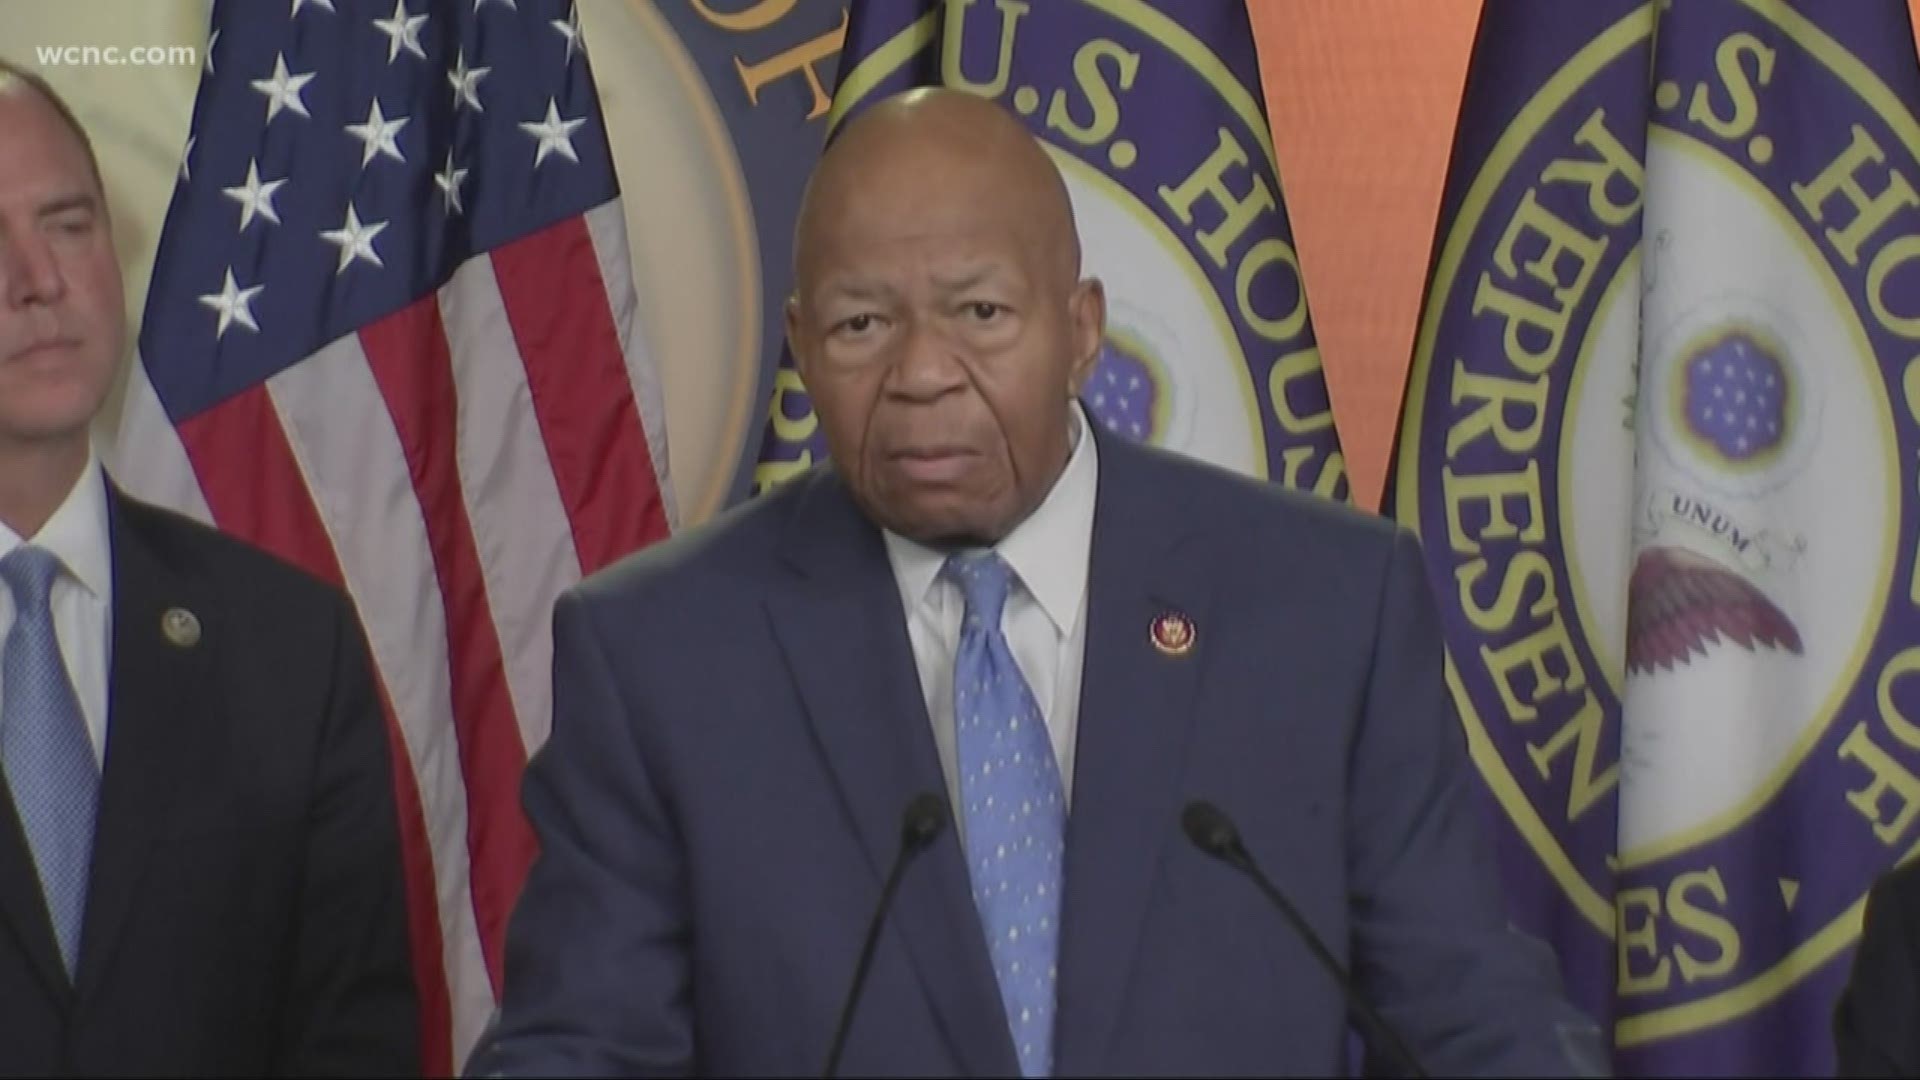 Long-serving U.S. Congressman Elijah Cummings has died at the age of 68, according to a statement from his office.